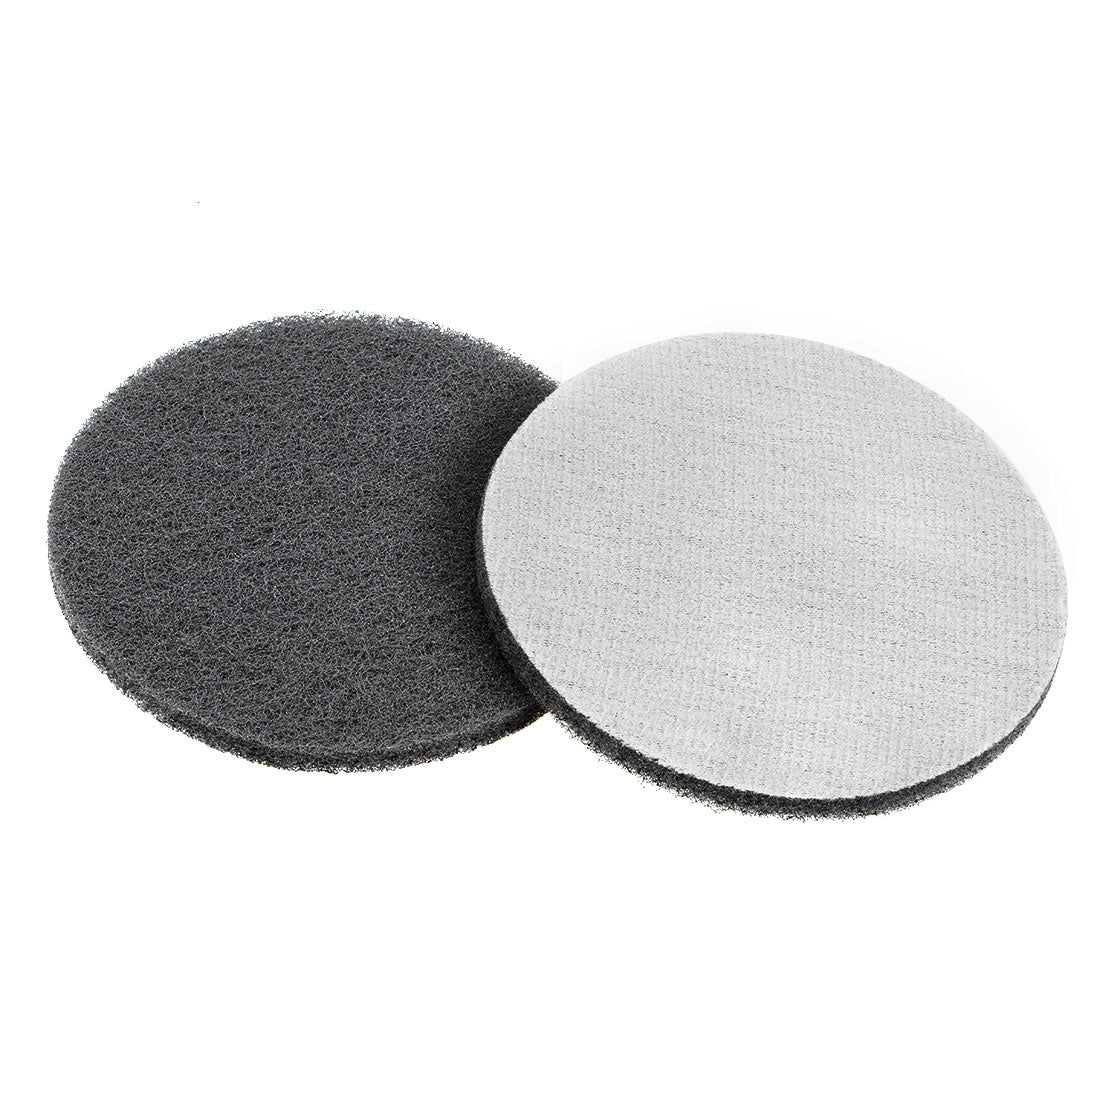 Uxcell Uxcell 5 Inch 1500 Grit Drill Power Brush Tile Scrubber Scouring Pads Cleaning Tool 2pcs